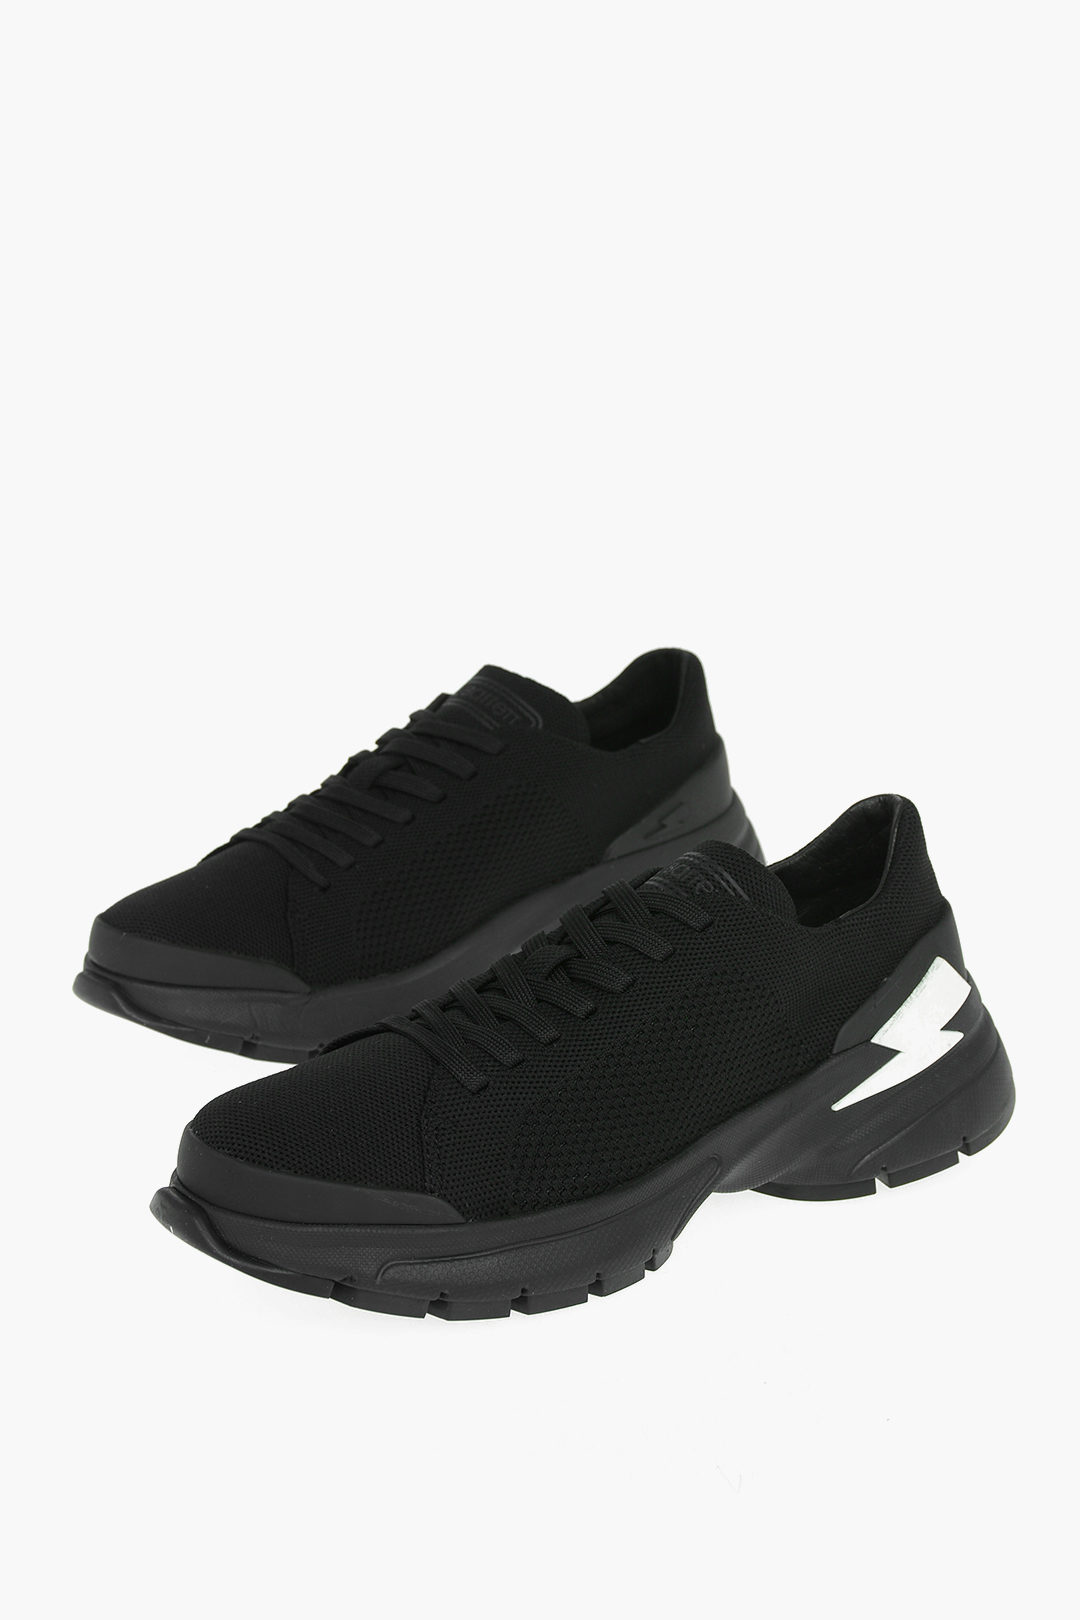 Neil Barrett solid color BOLT LACE-UP low-top sneakers with contrasting ...